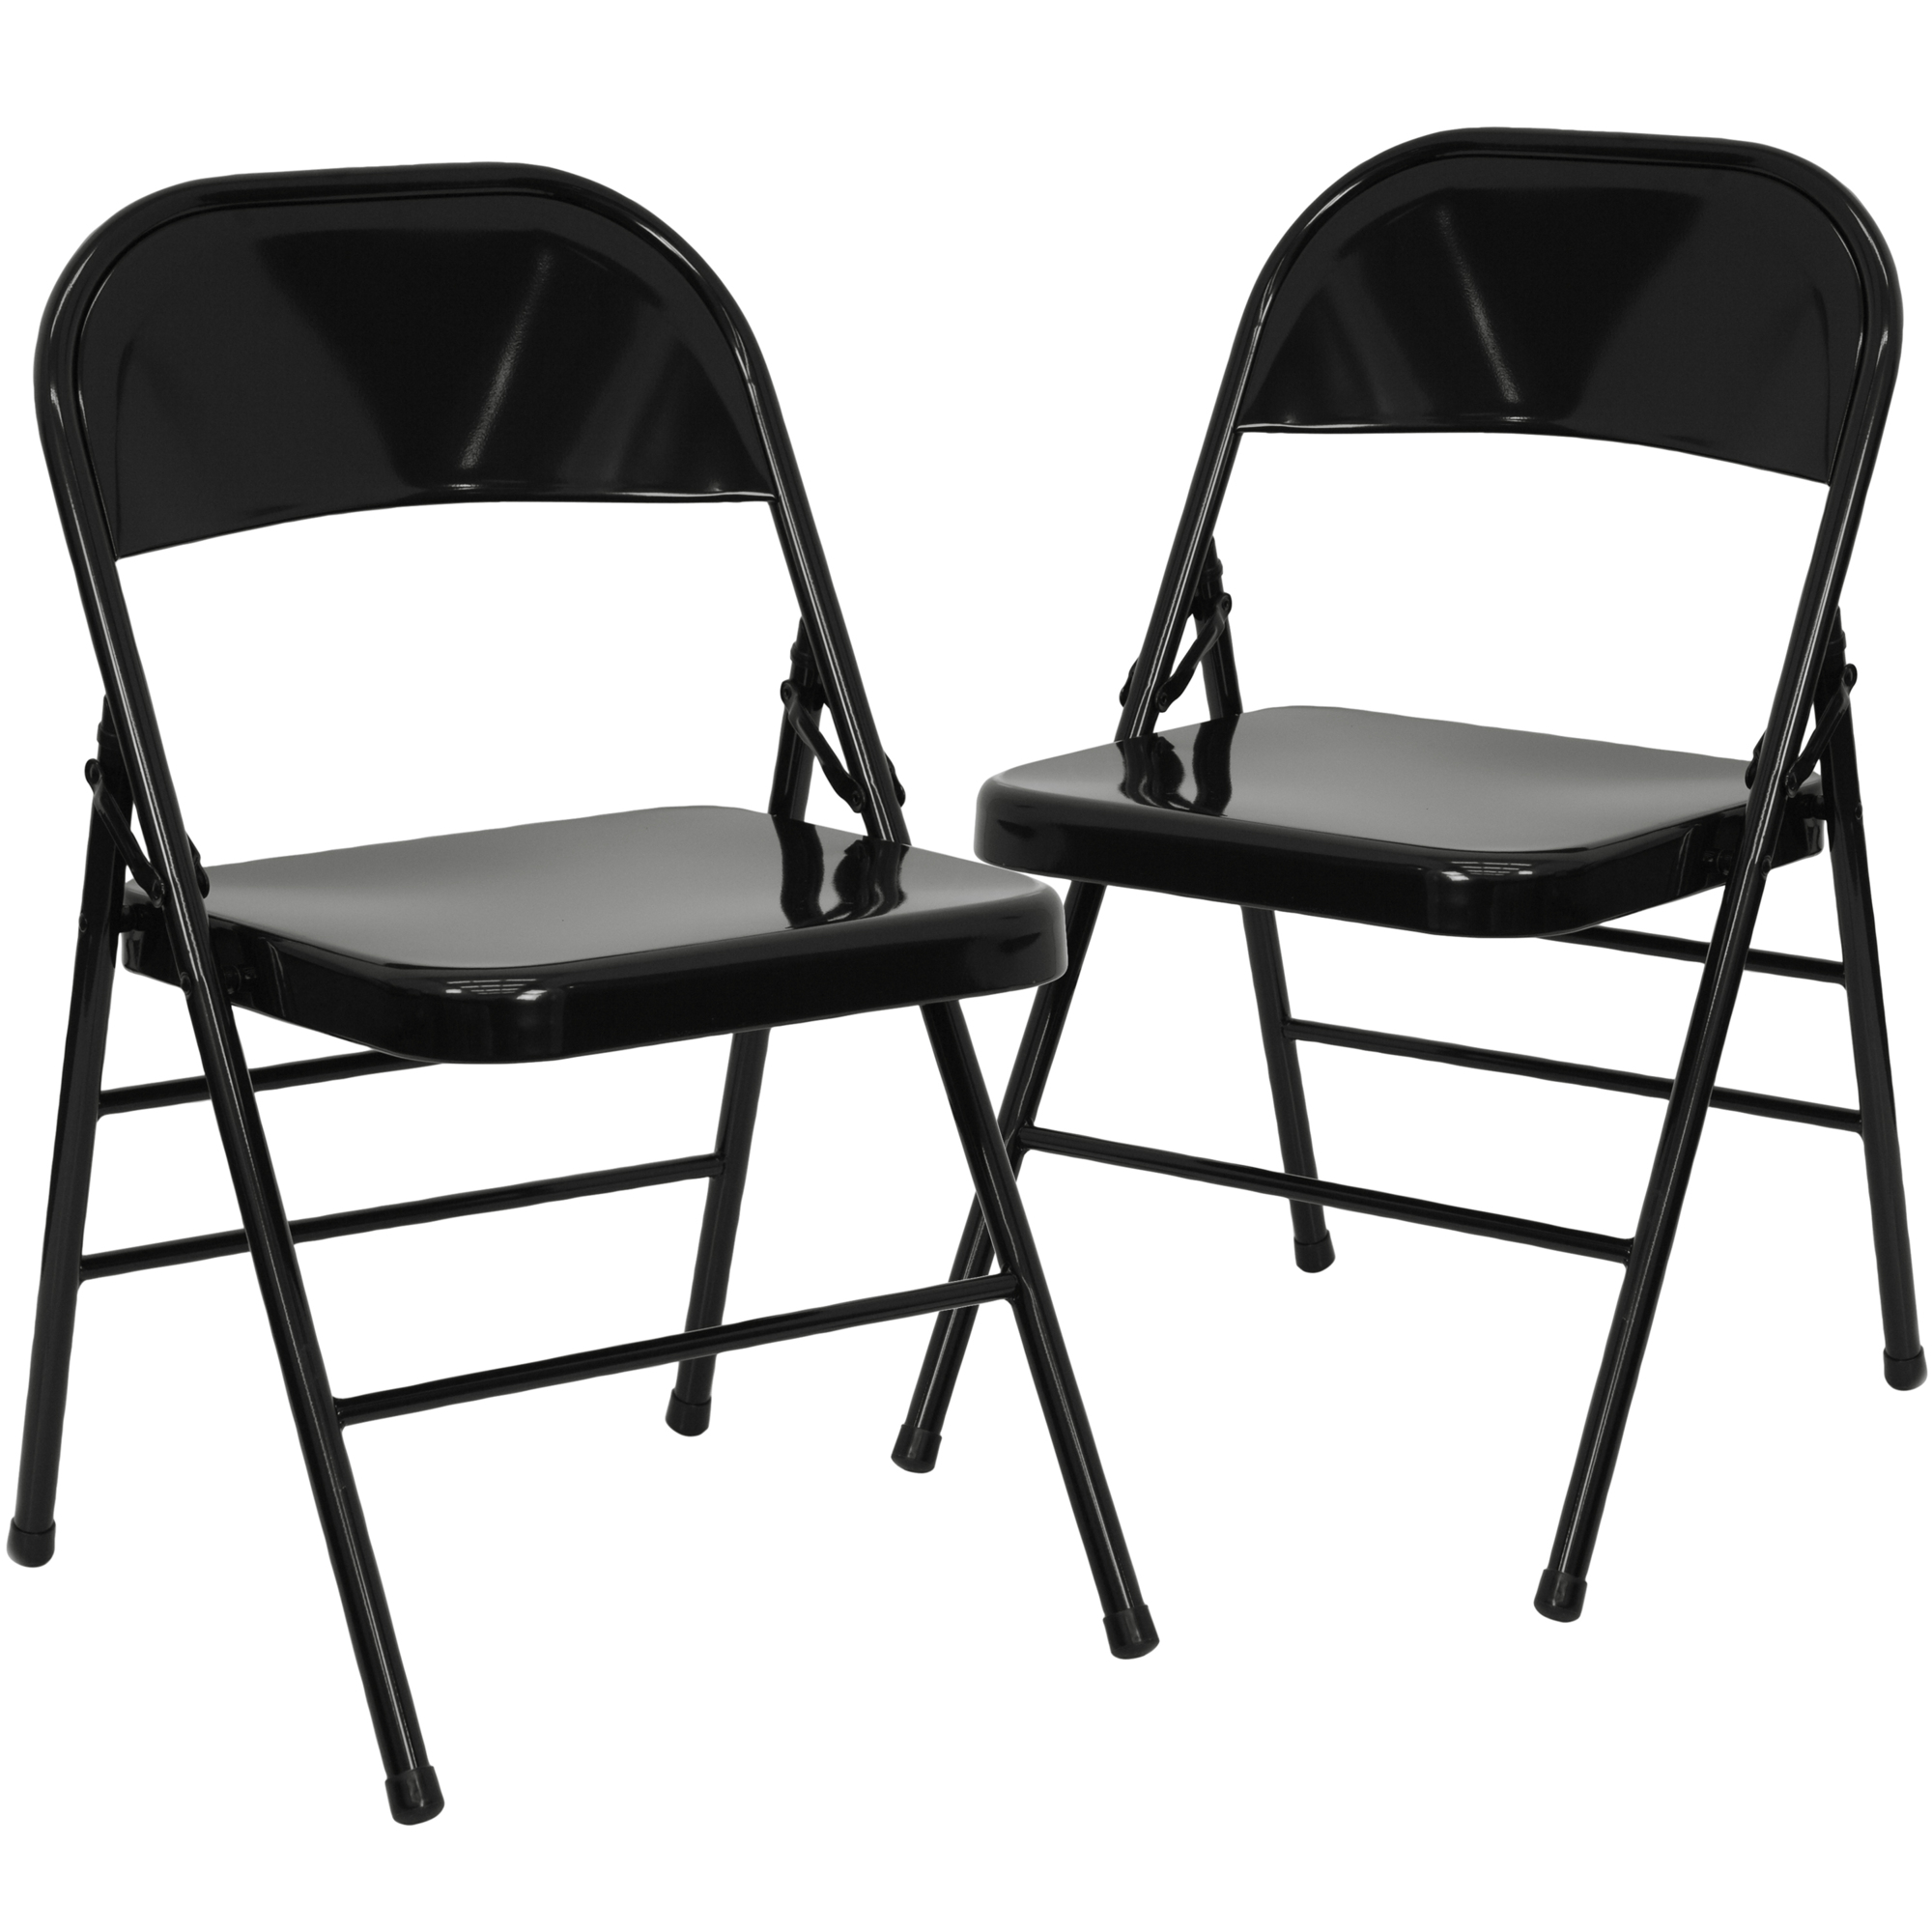 Flash Furniture, Triple Braced Double Hinged Black Folding Chair, Primary Color Black, Included (qty.) 2, Model 2HF3MC309ASBK